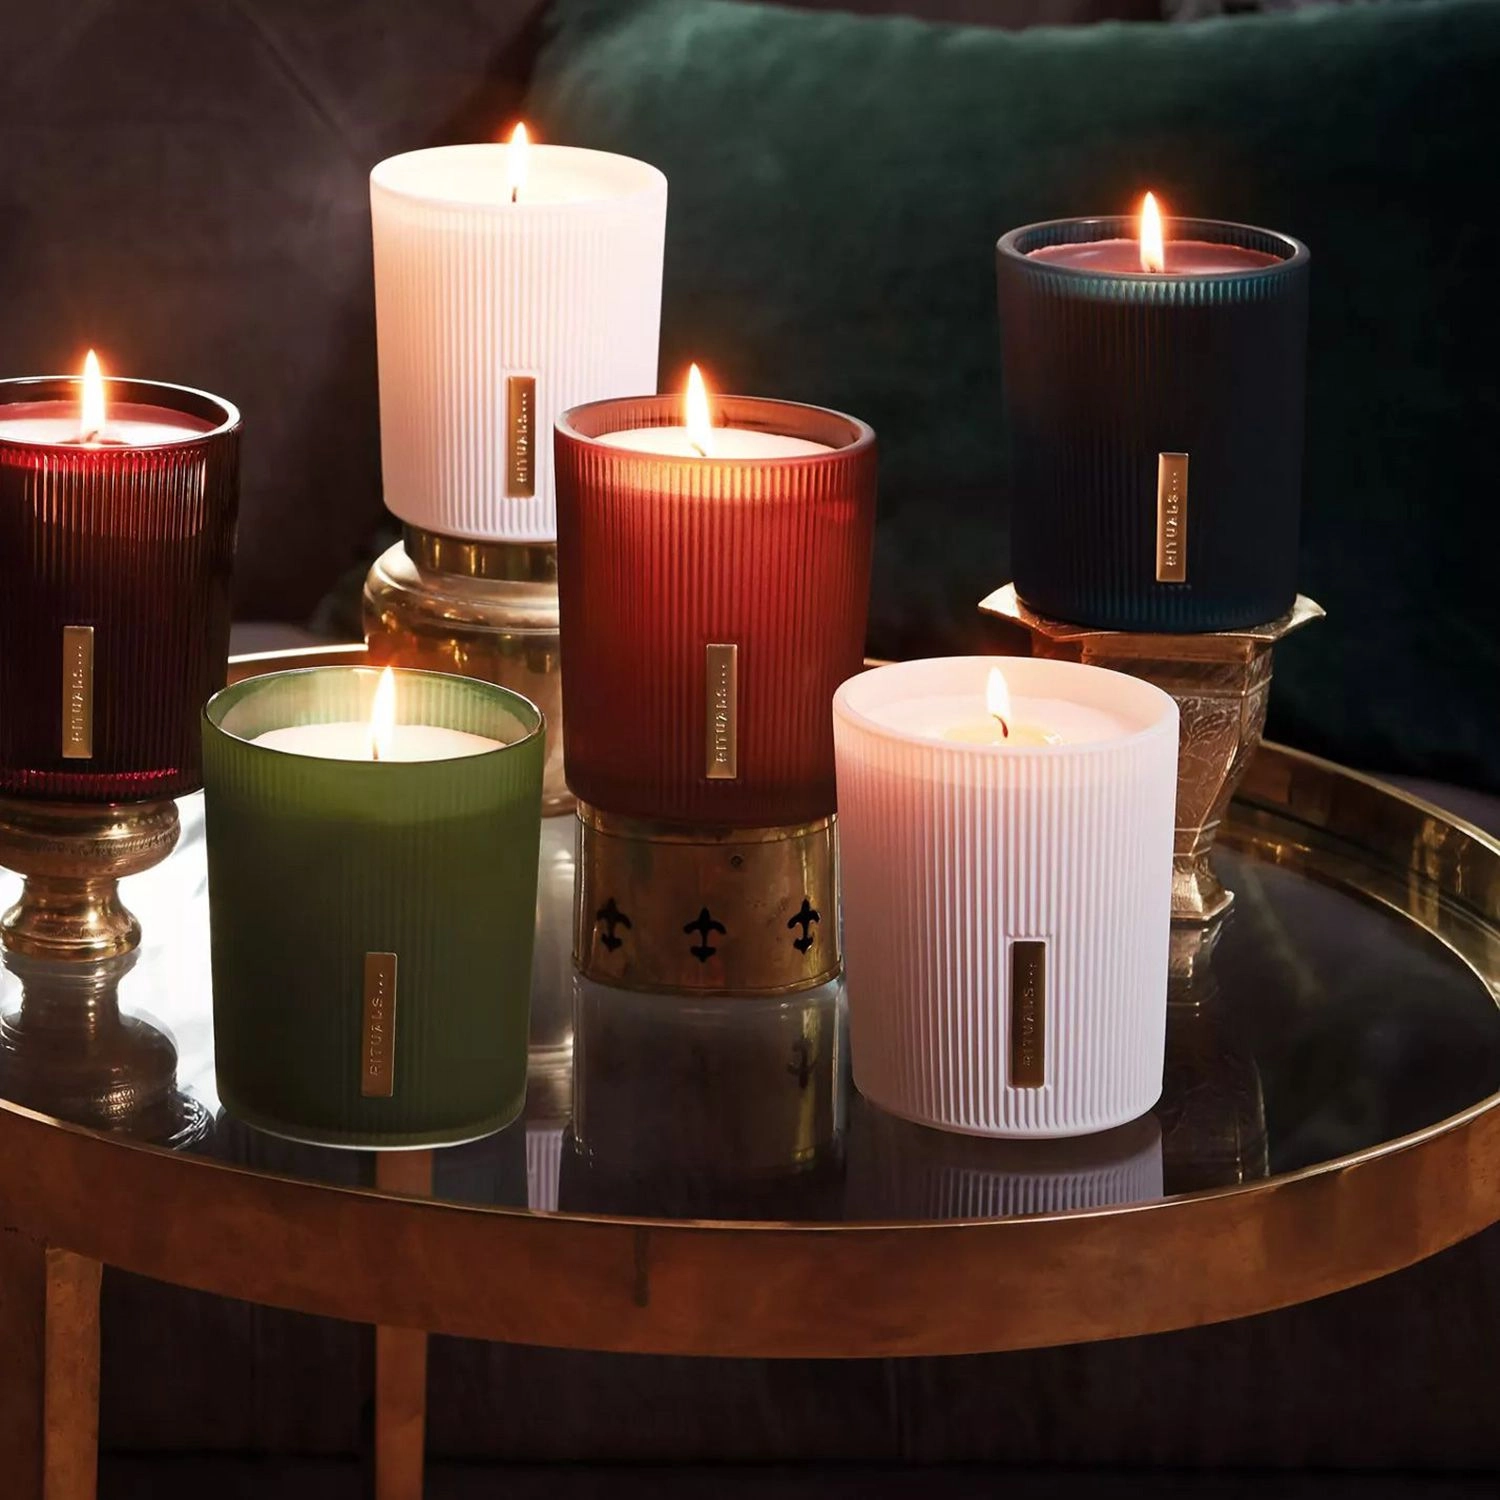 Rituals Ароматическая свеча The Ritual Of Mehr Scented Candle, 290 г - фото N3